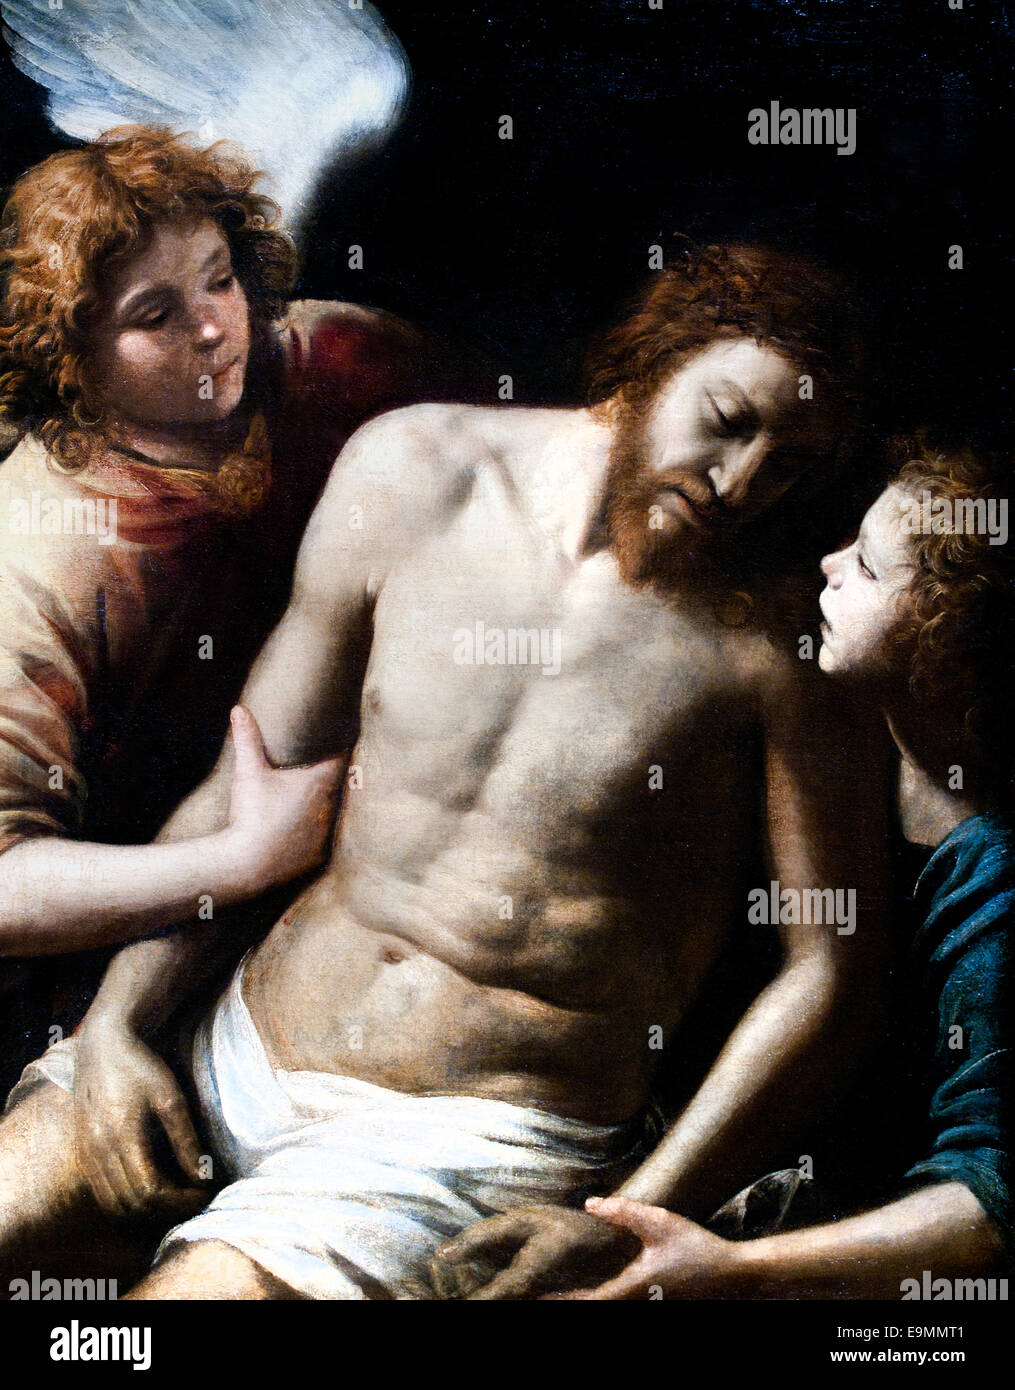 Christ mort soutenu par deux anges - Dead Christ Supported by two angels.  1628 by Giuseppe Vermiglio1885-1635  Italy Italian Stock Photo